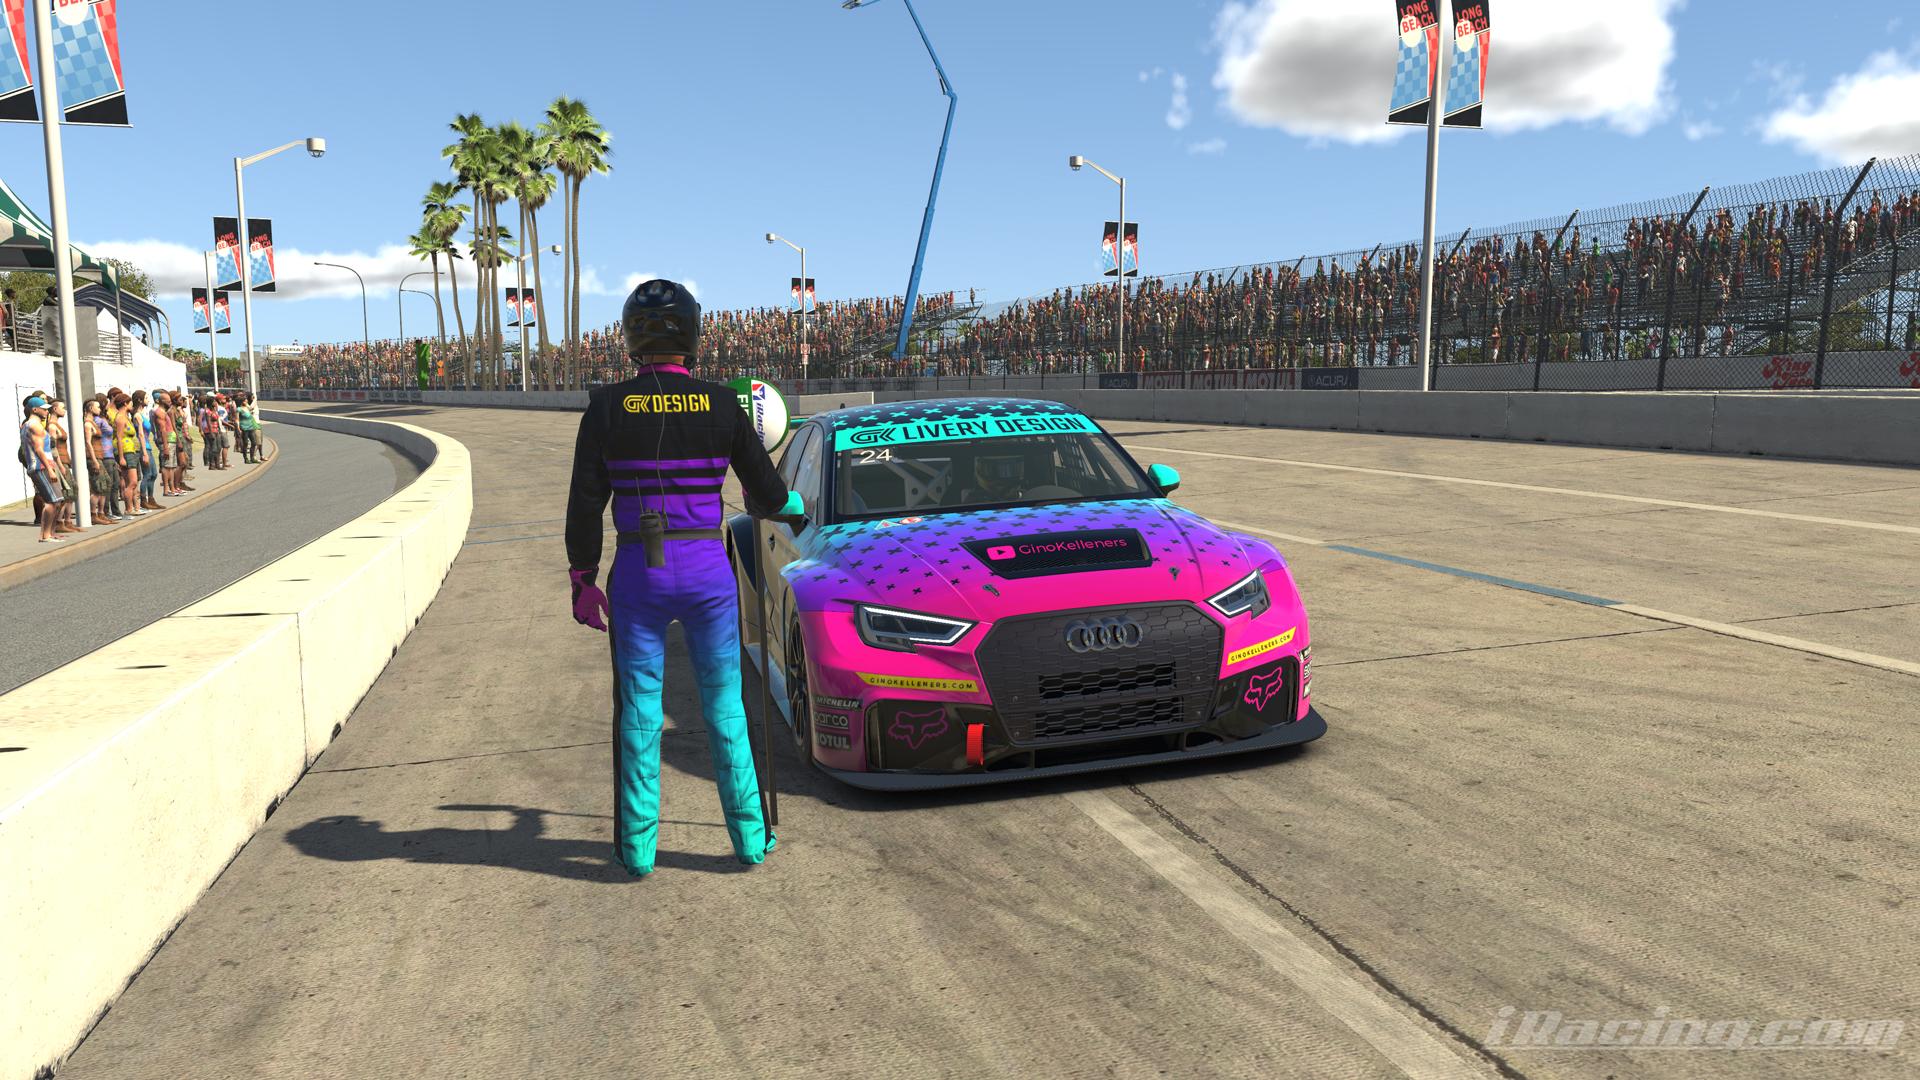 Preview of Racing Suit - Unicorn Slush X Audi RS 3 LMS by Gino Kelleners